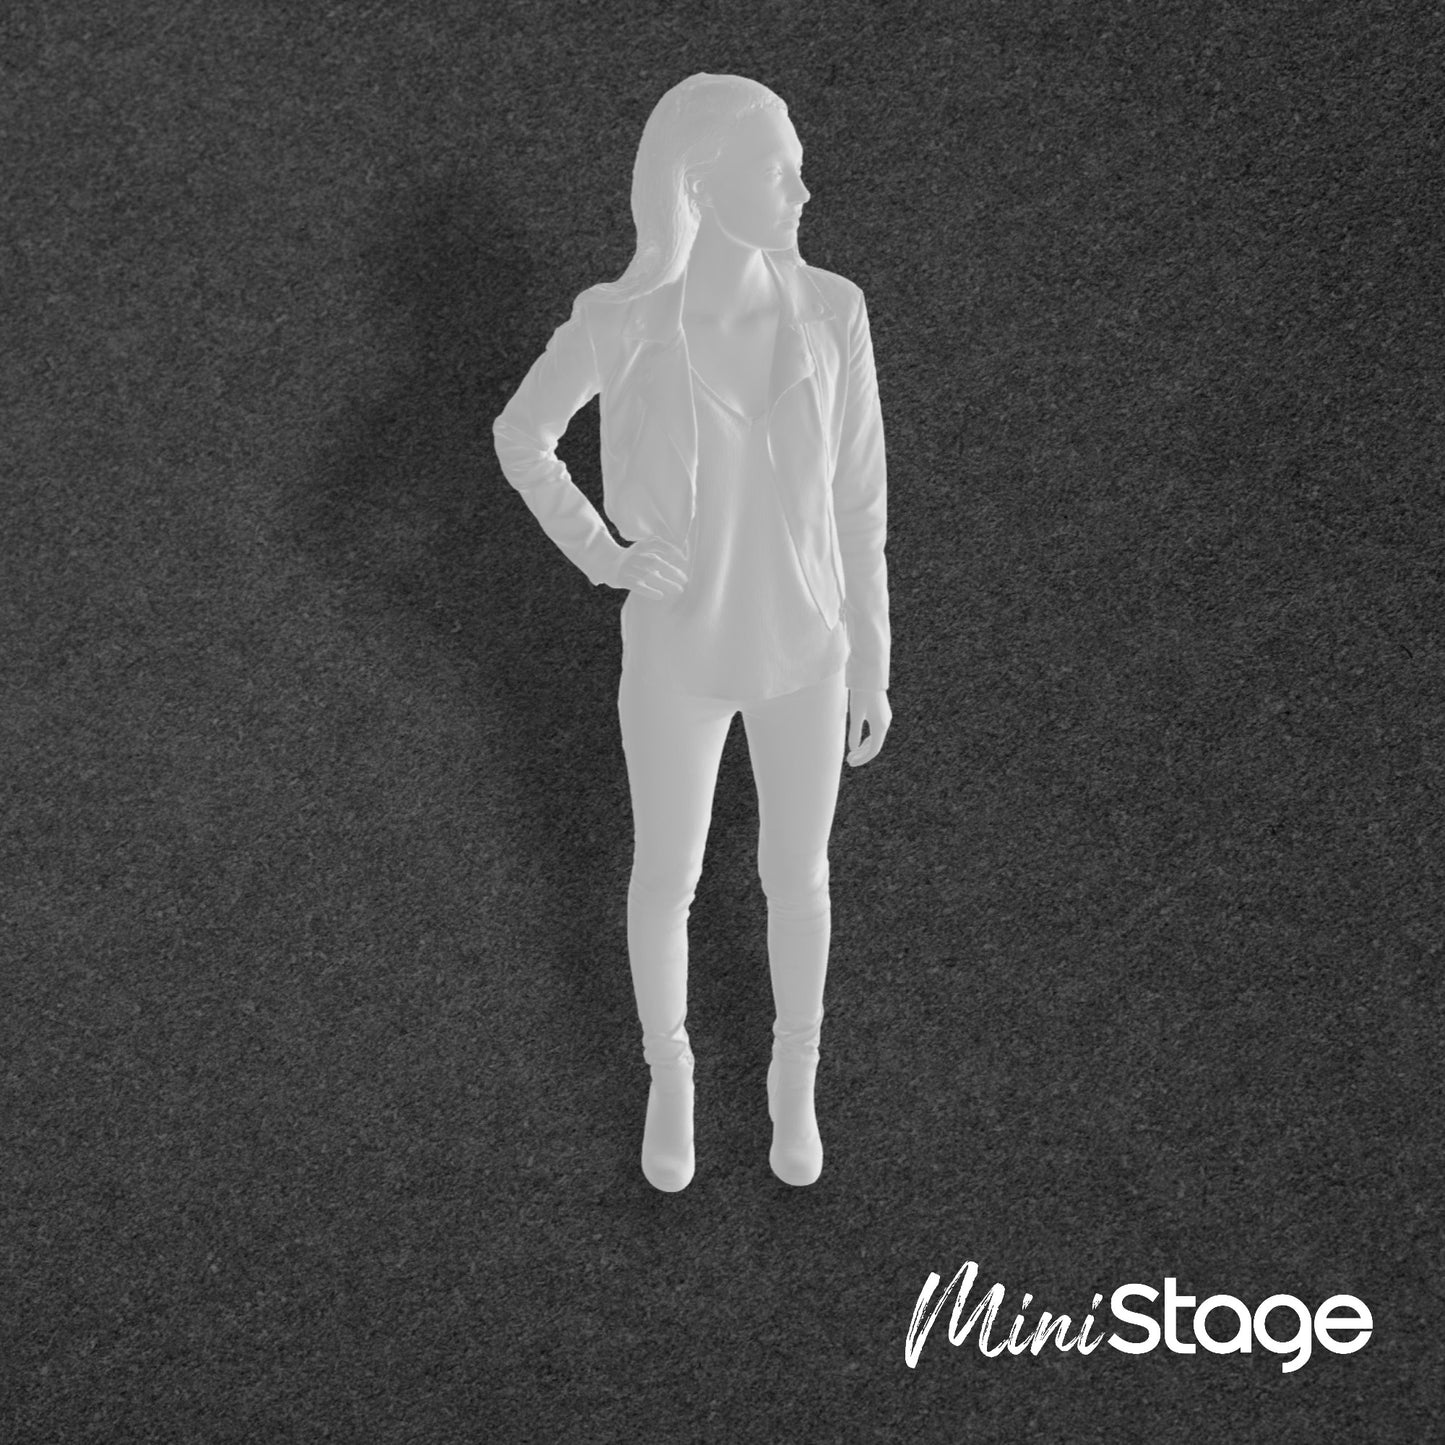 Abigail - Scale Model Box Unpainted Figure of Woman wearing leggings, leather jacket and boots she stands with he right hand on her hip.